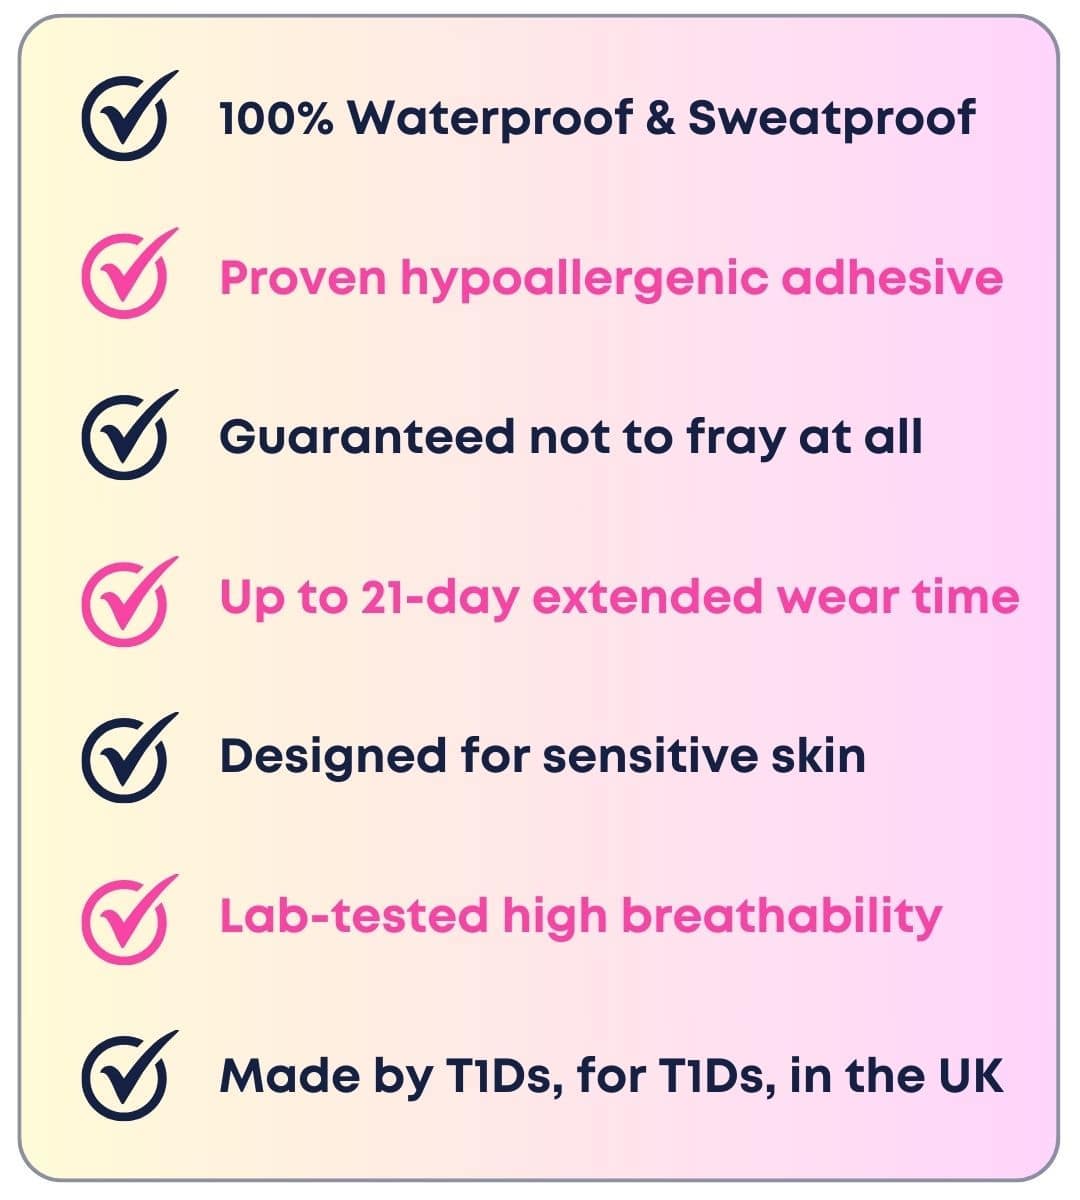 A list of benefits of Type One Style adhesive CGM patches.